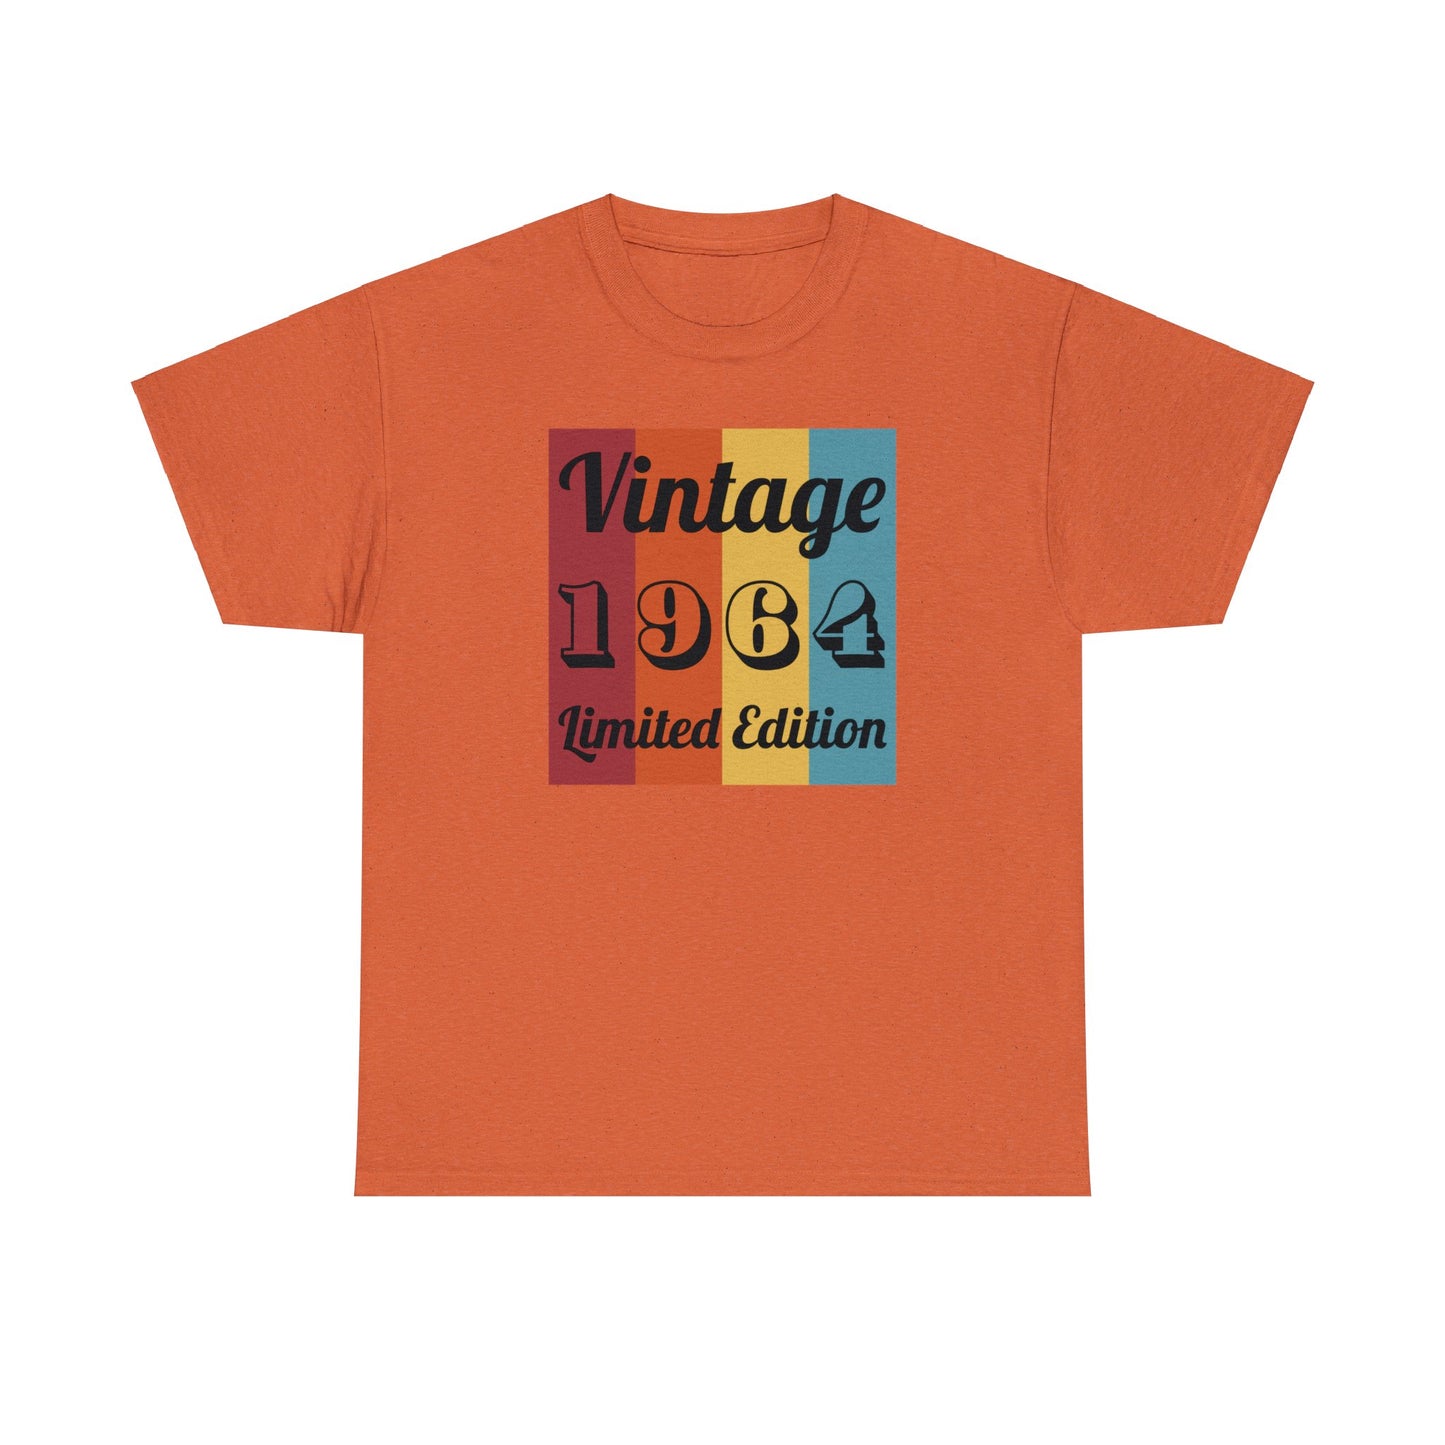 1964 T-Shirt For Vintage Limited Edition TShirt For Class Reunion Shirt For Birthday T Shirt For Birth Year Shirt For Graduation Year Shirt